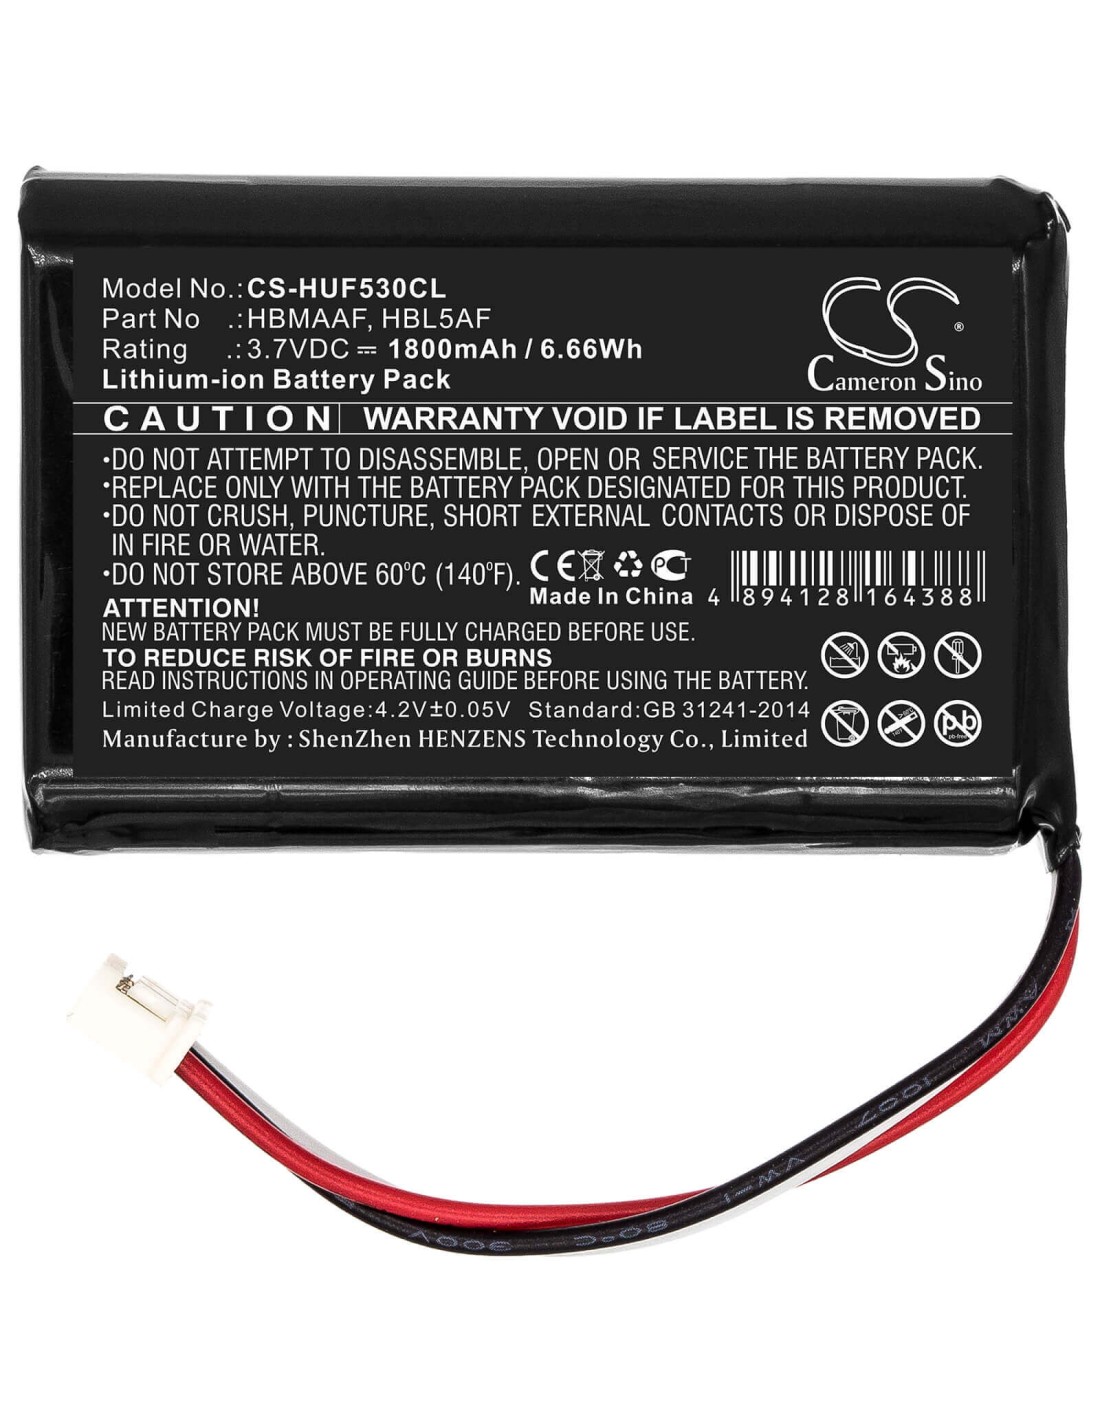 Battery for Huawei, Ets5623, F202, F316 3.7V, 1800mAh - 6.66Wh